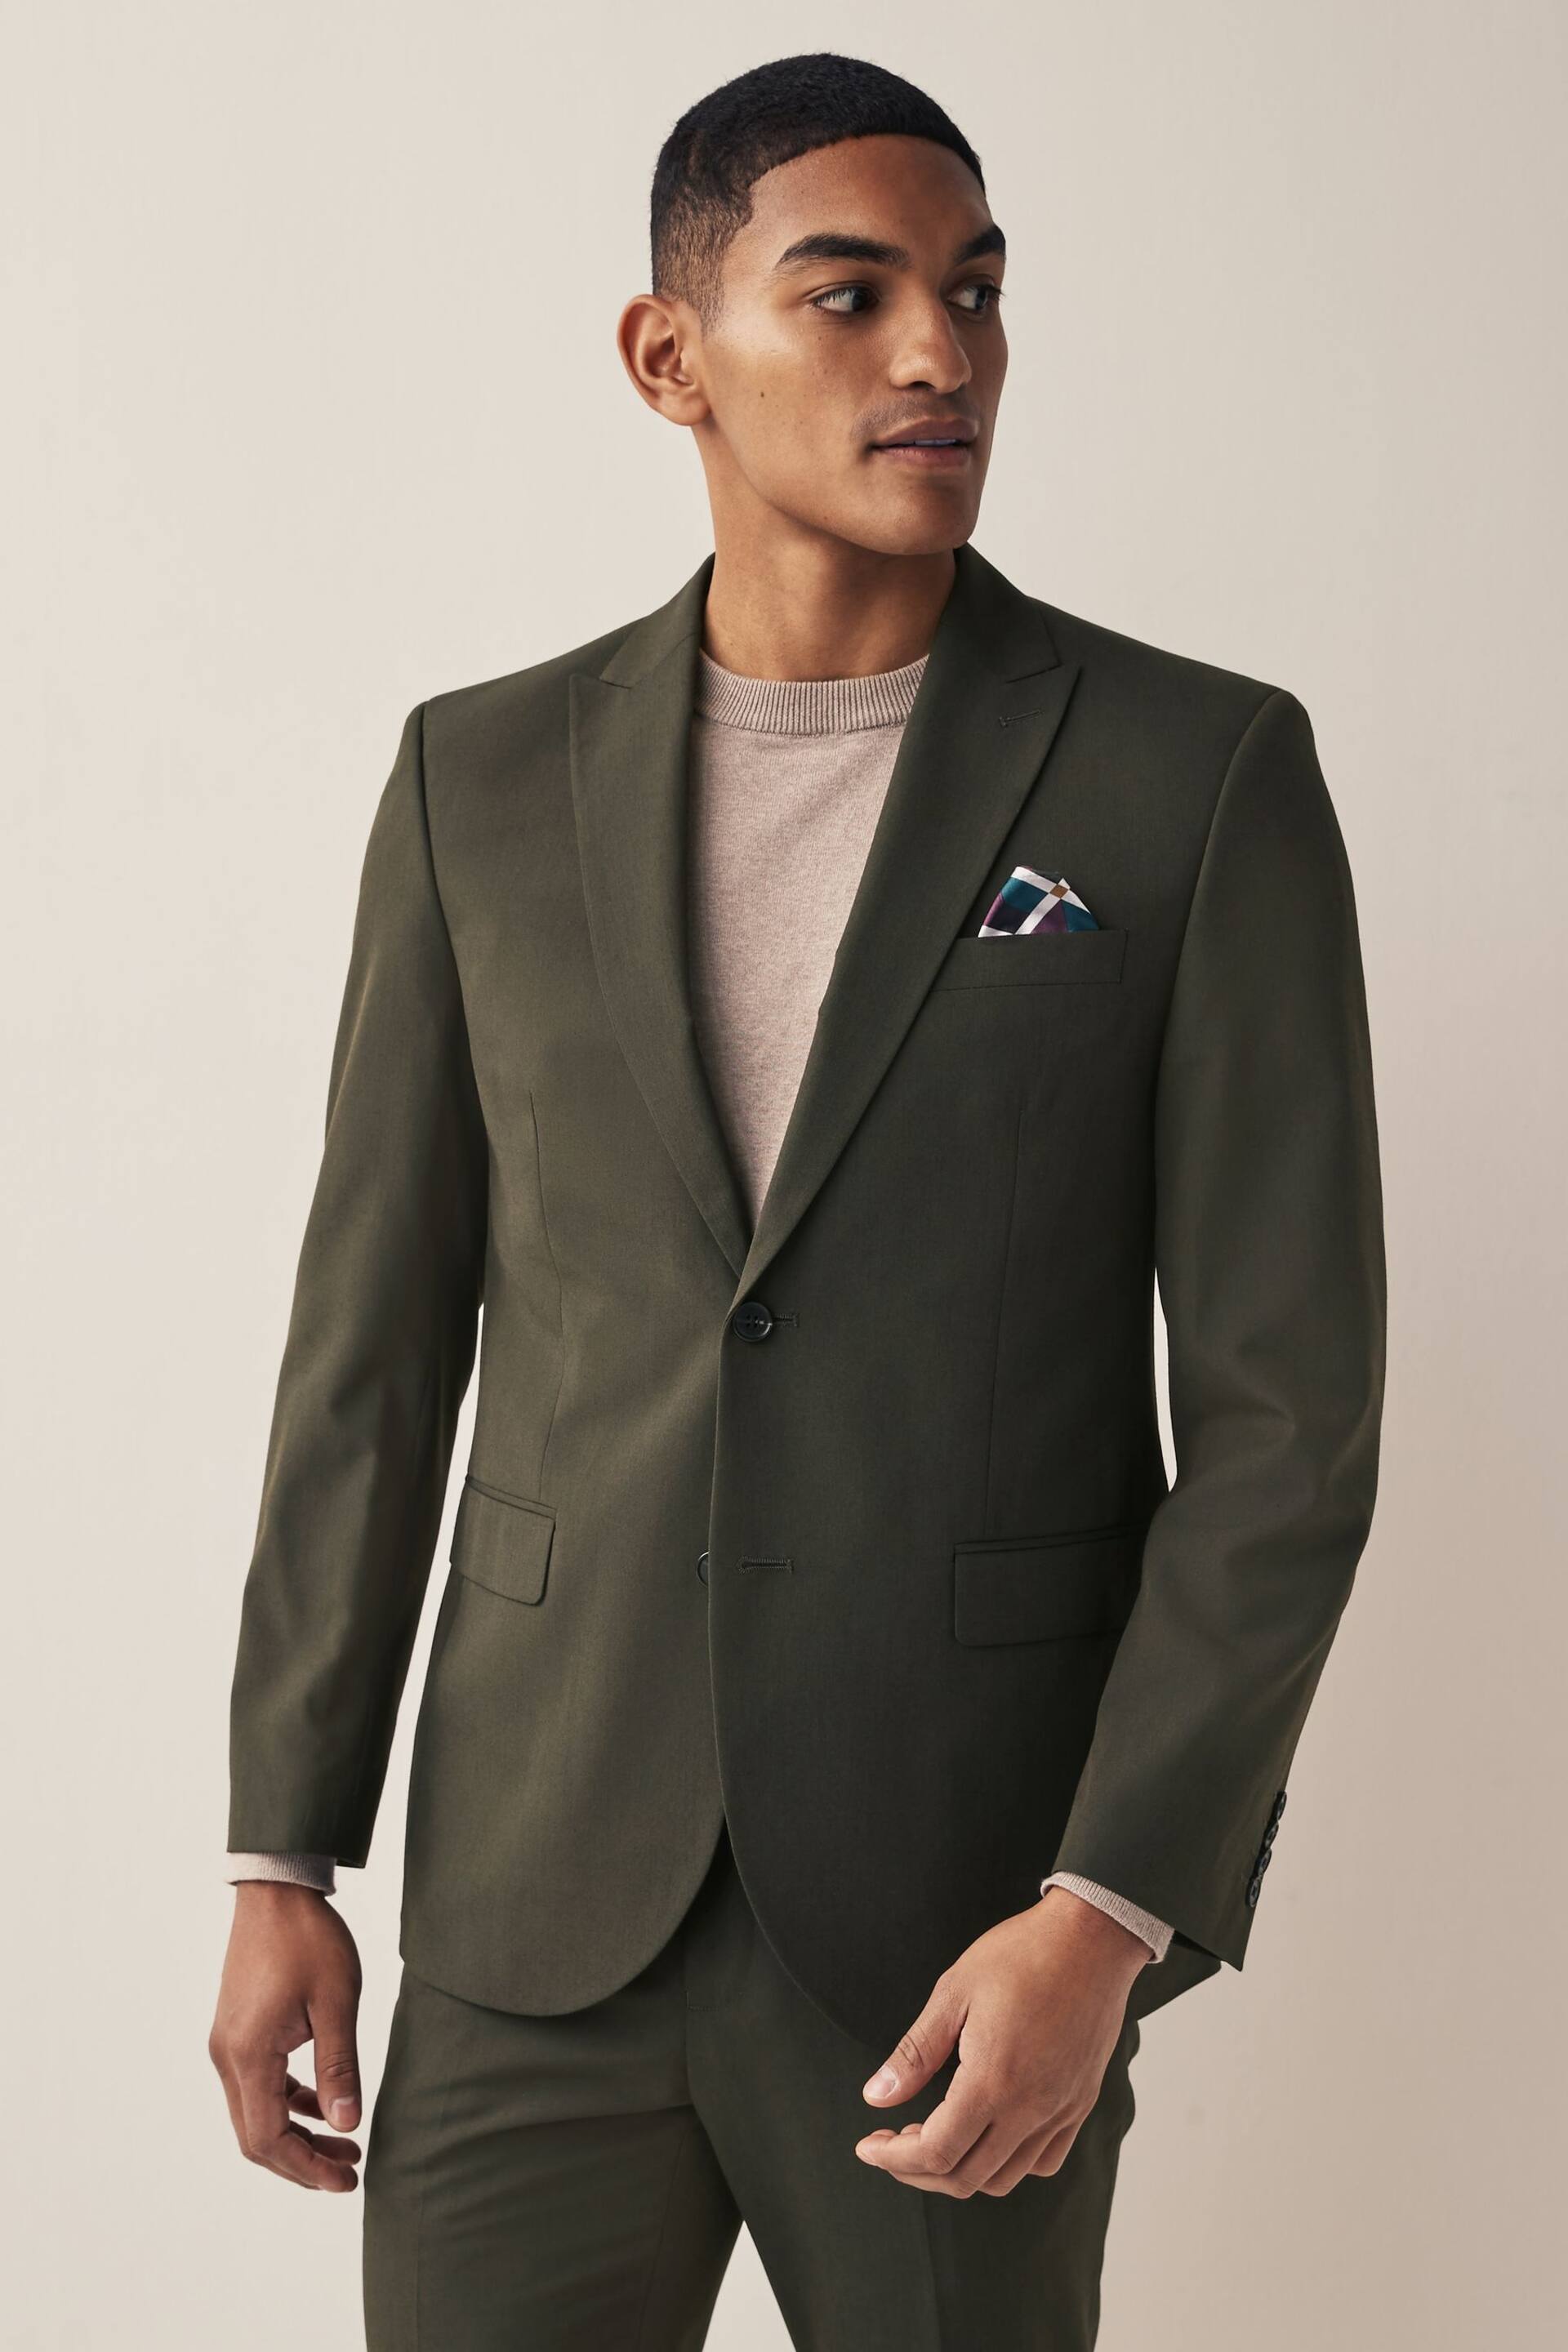 Green Two Button Suit Jacket - Image 1 of 10